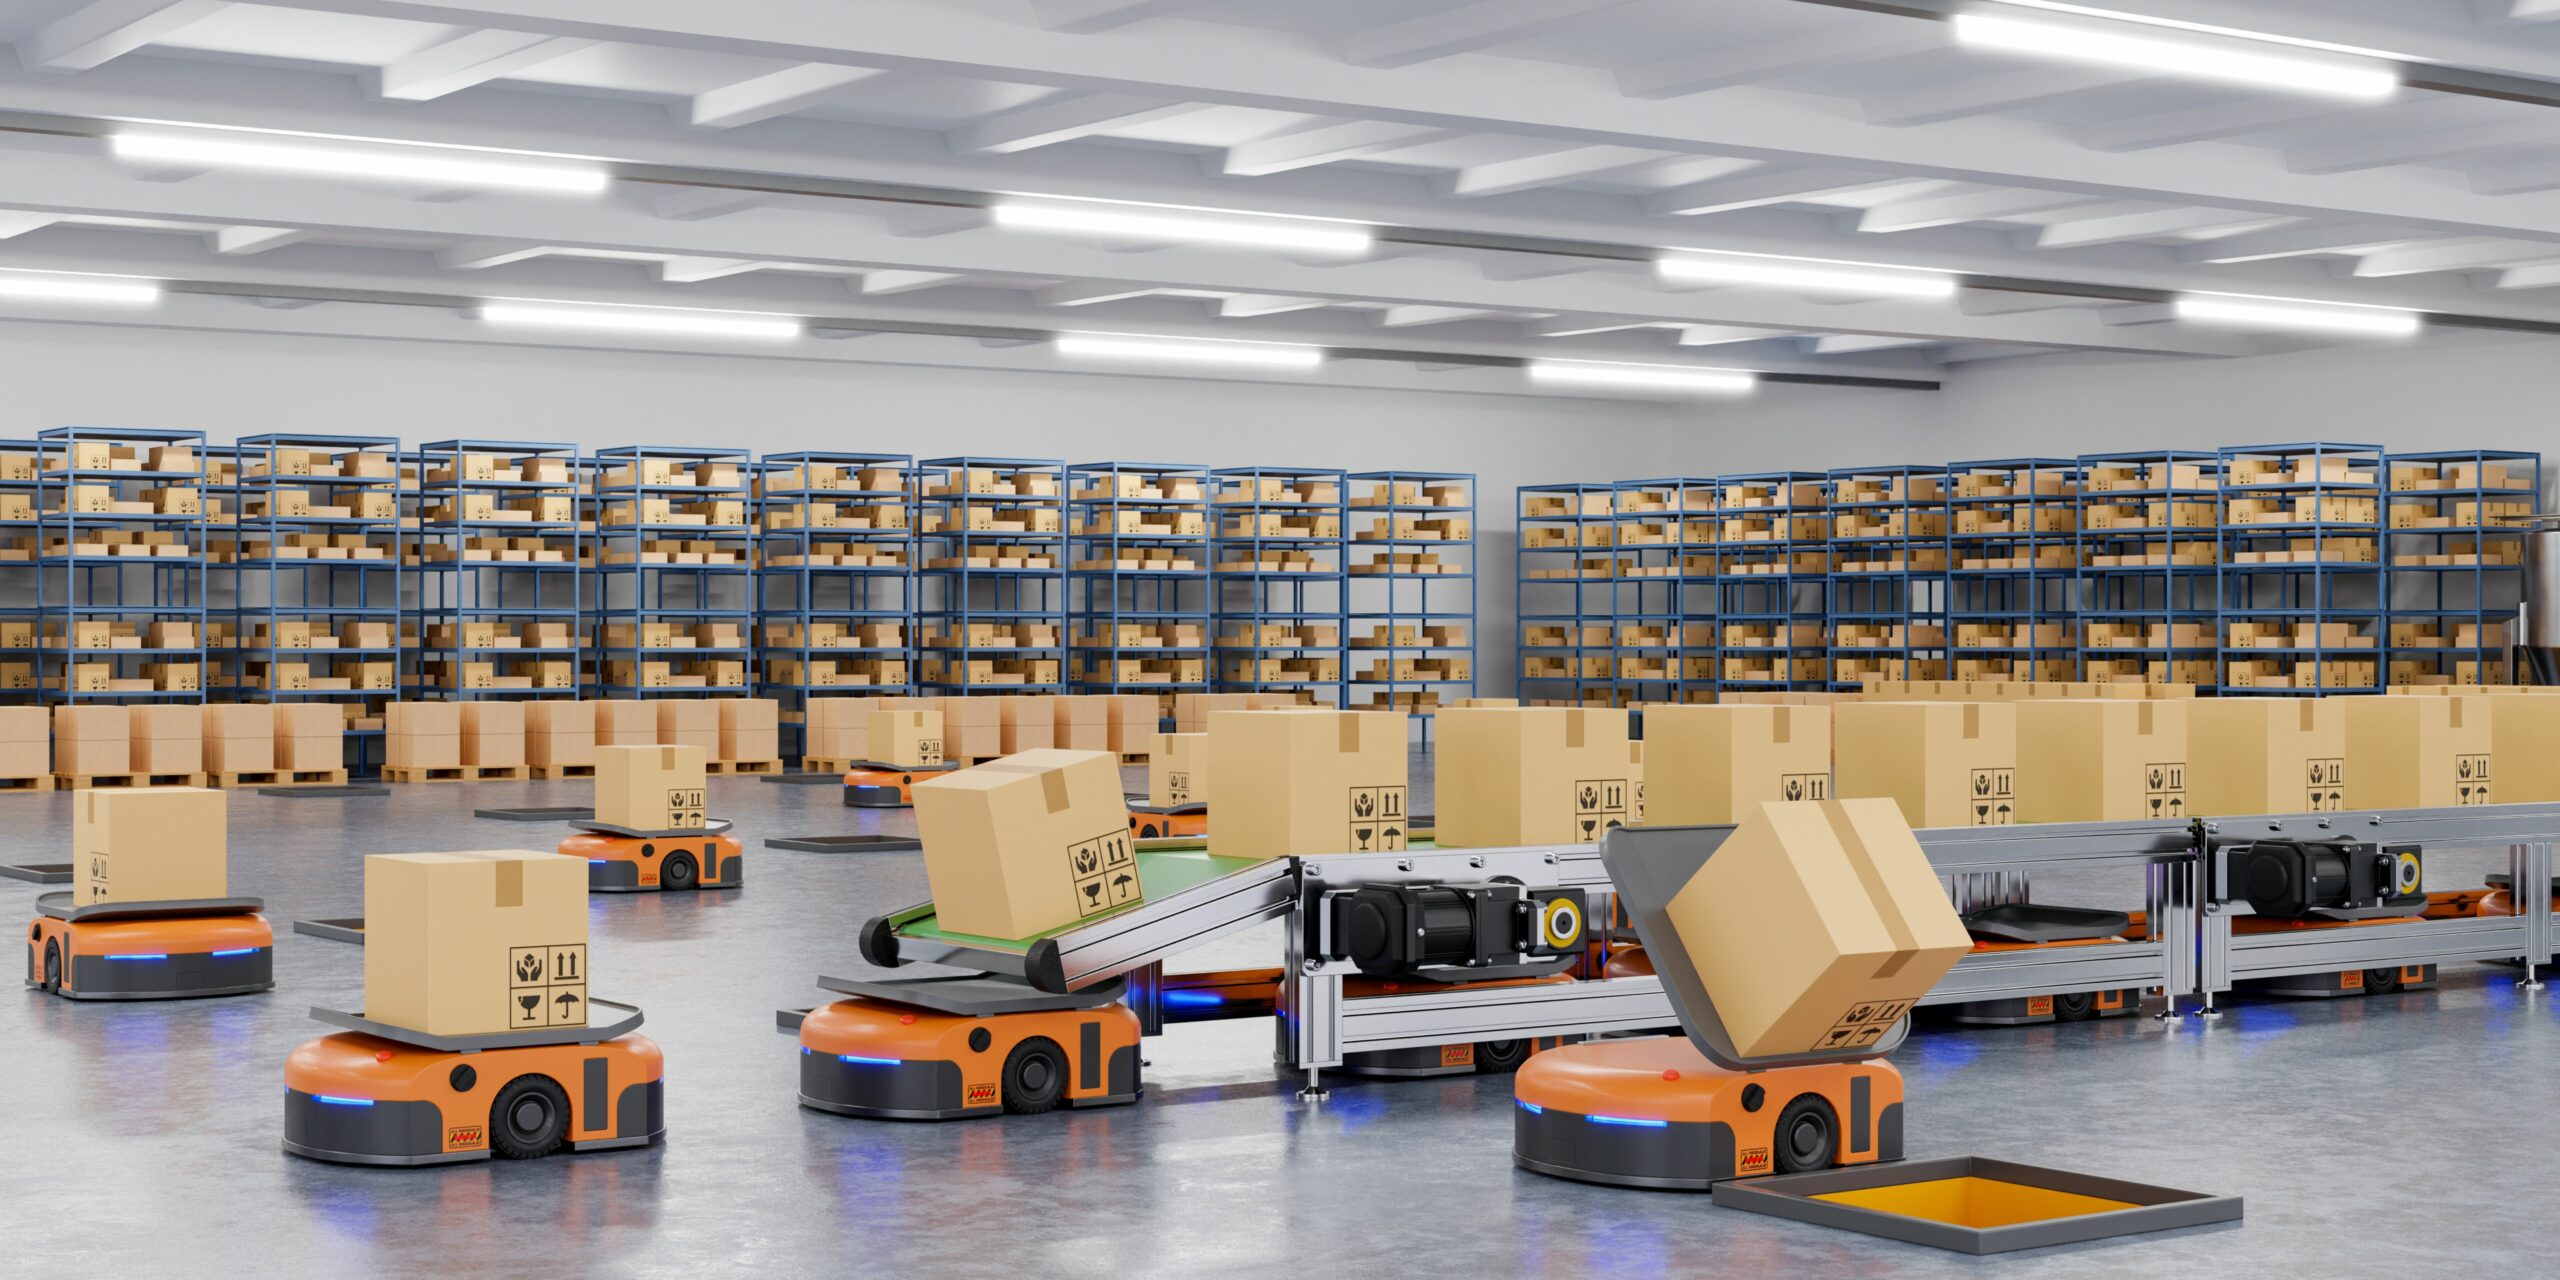 Using AI-based robotics in the warehouse